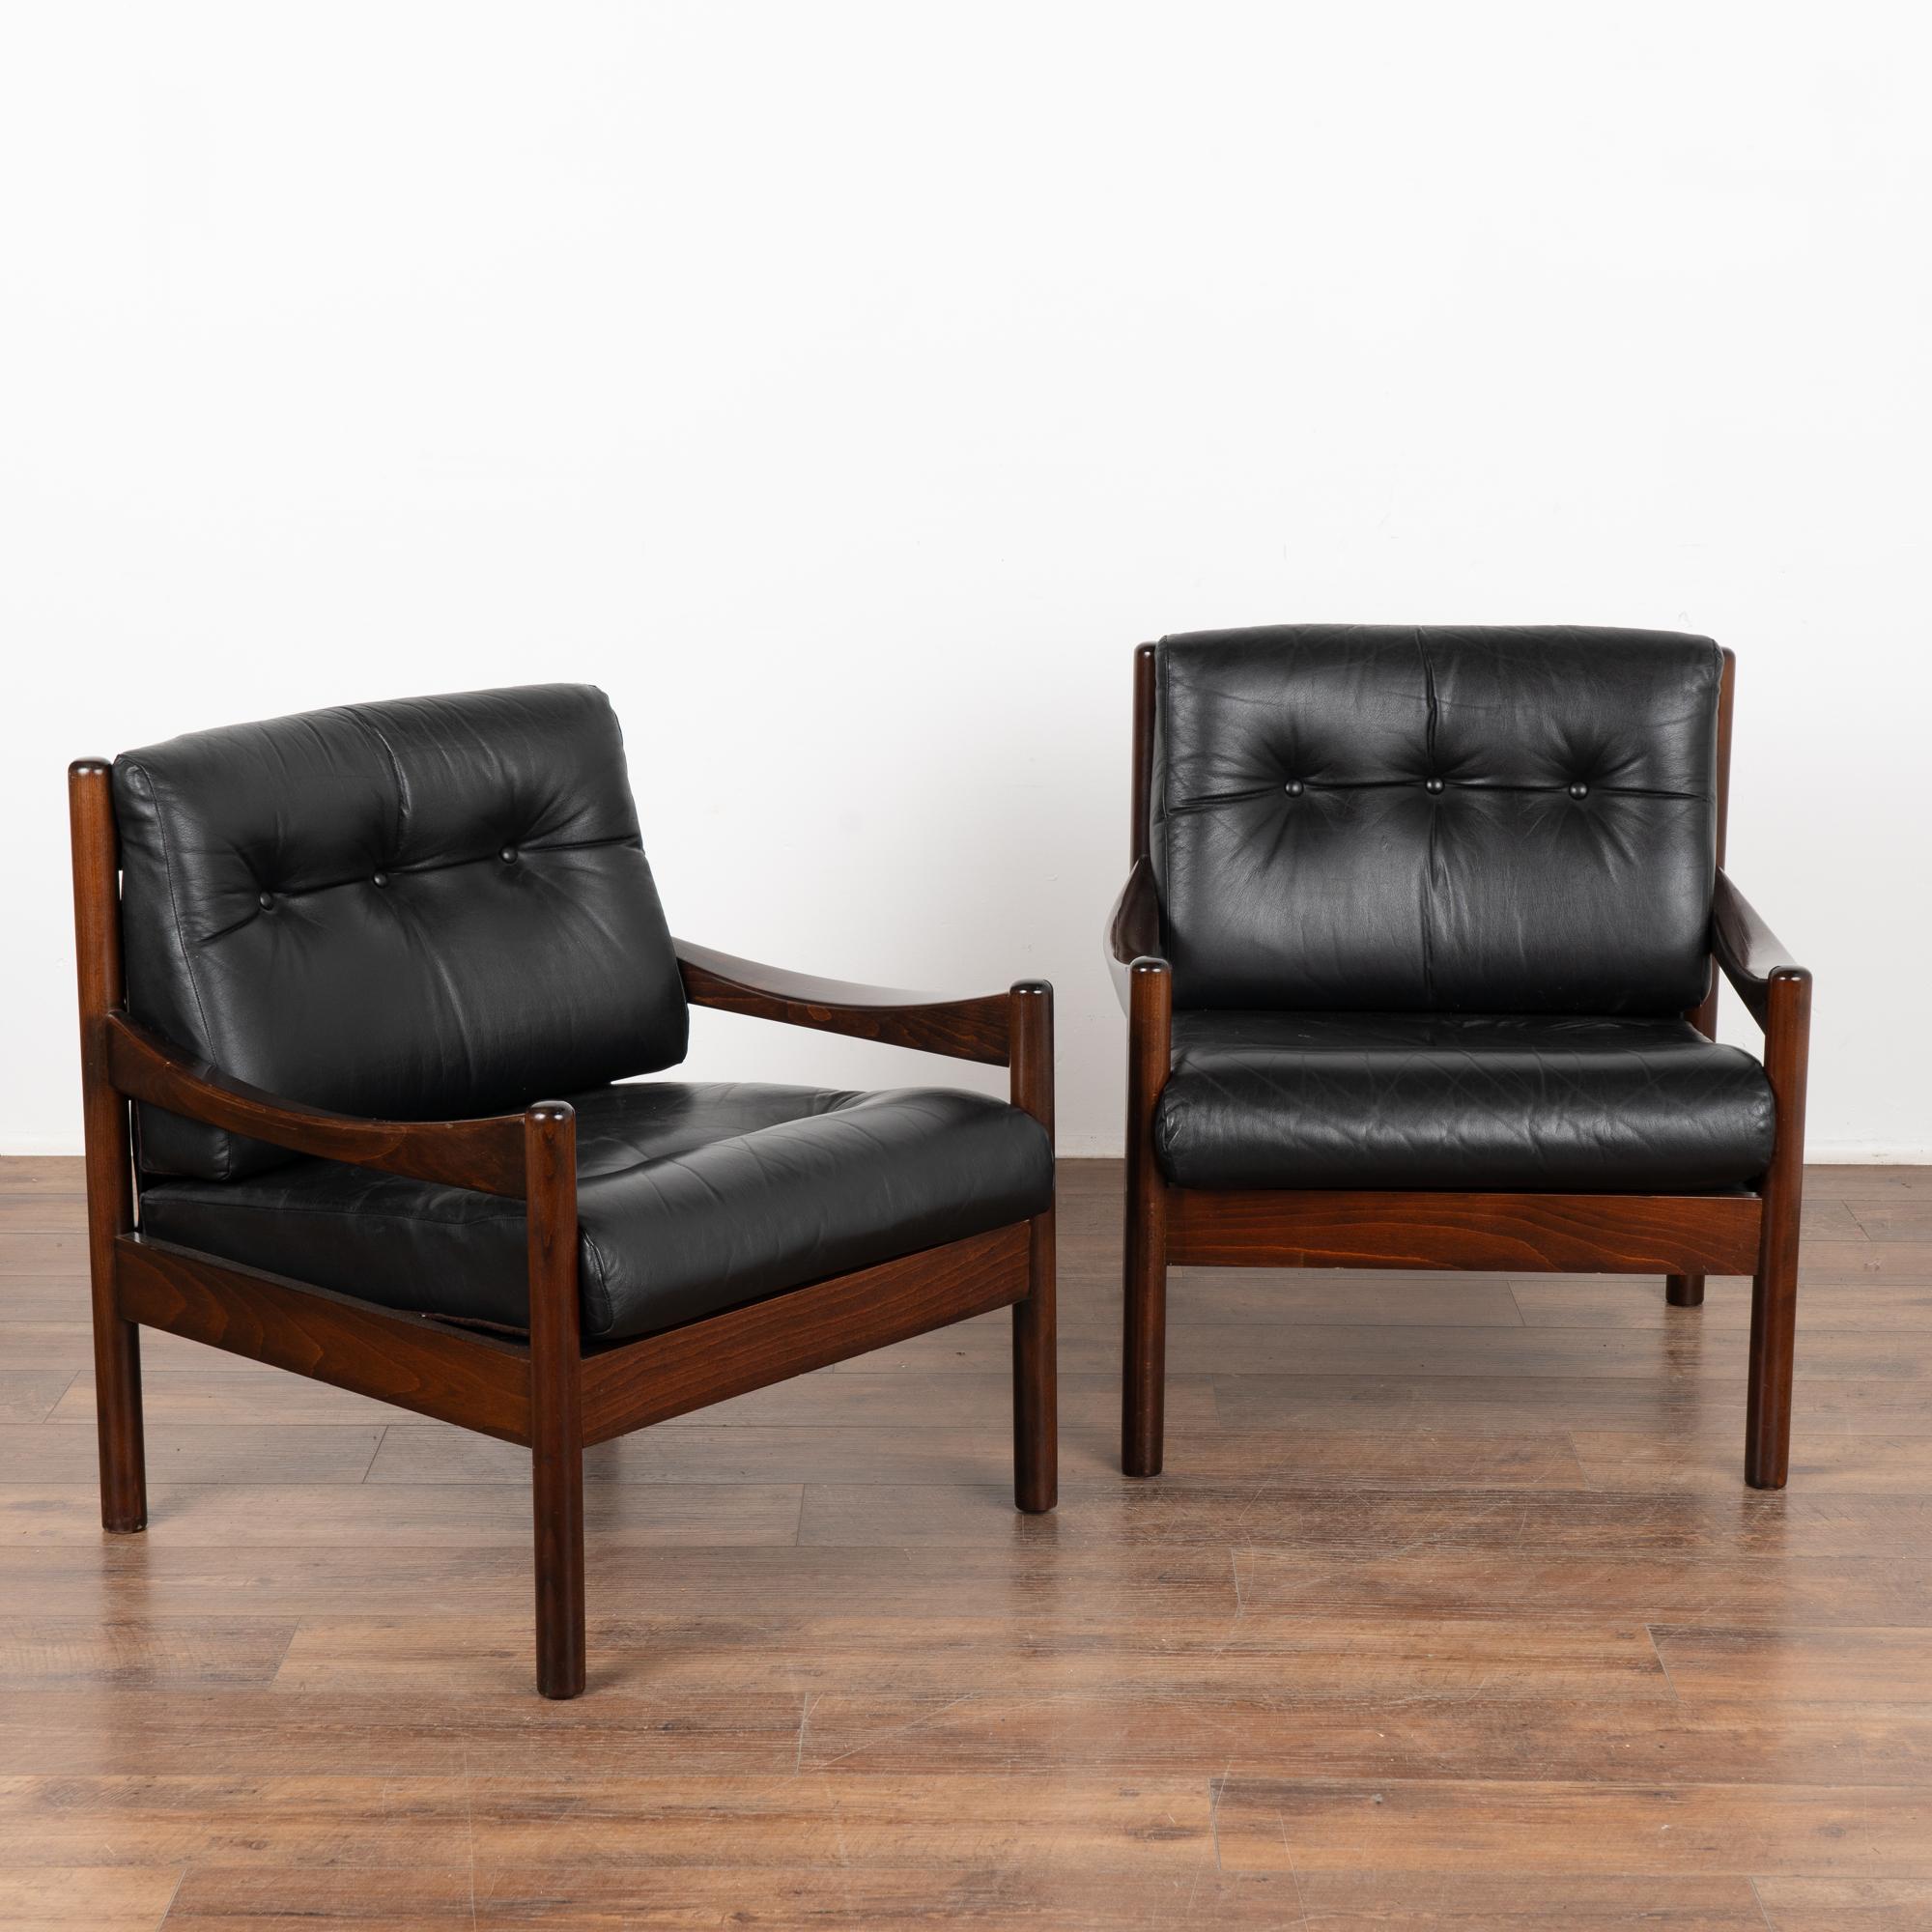 Pair, mid-century modern black leather arm chairs with tufted back and seat, three buttons in place on each.
Clean modern design with hardwood frame, these chairs sit low and comfortable.
Sold in solid, vintage used condition. Frame and leather